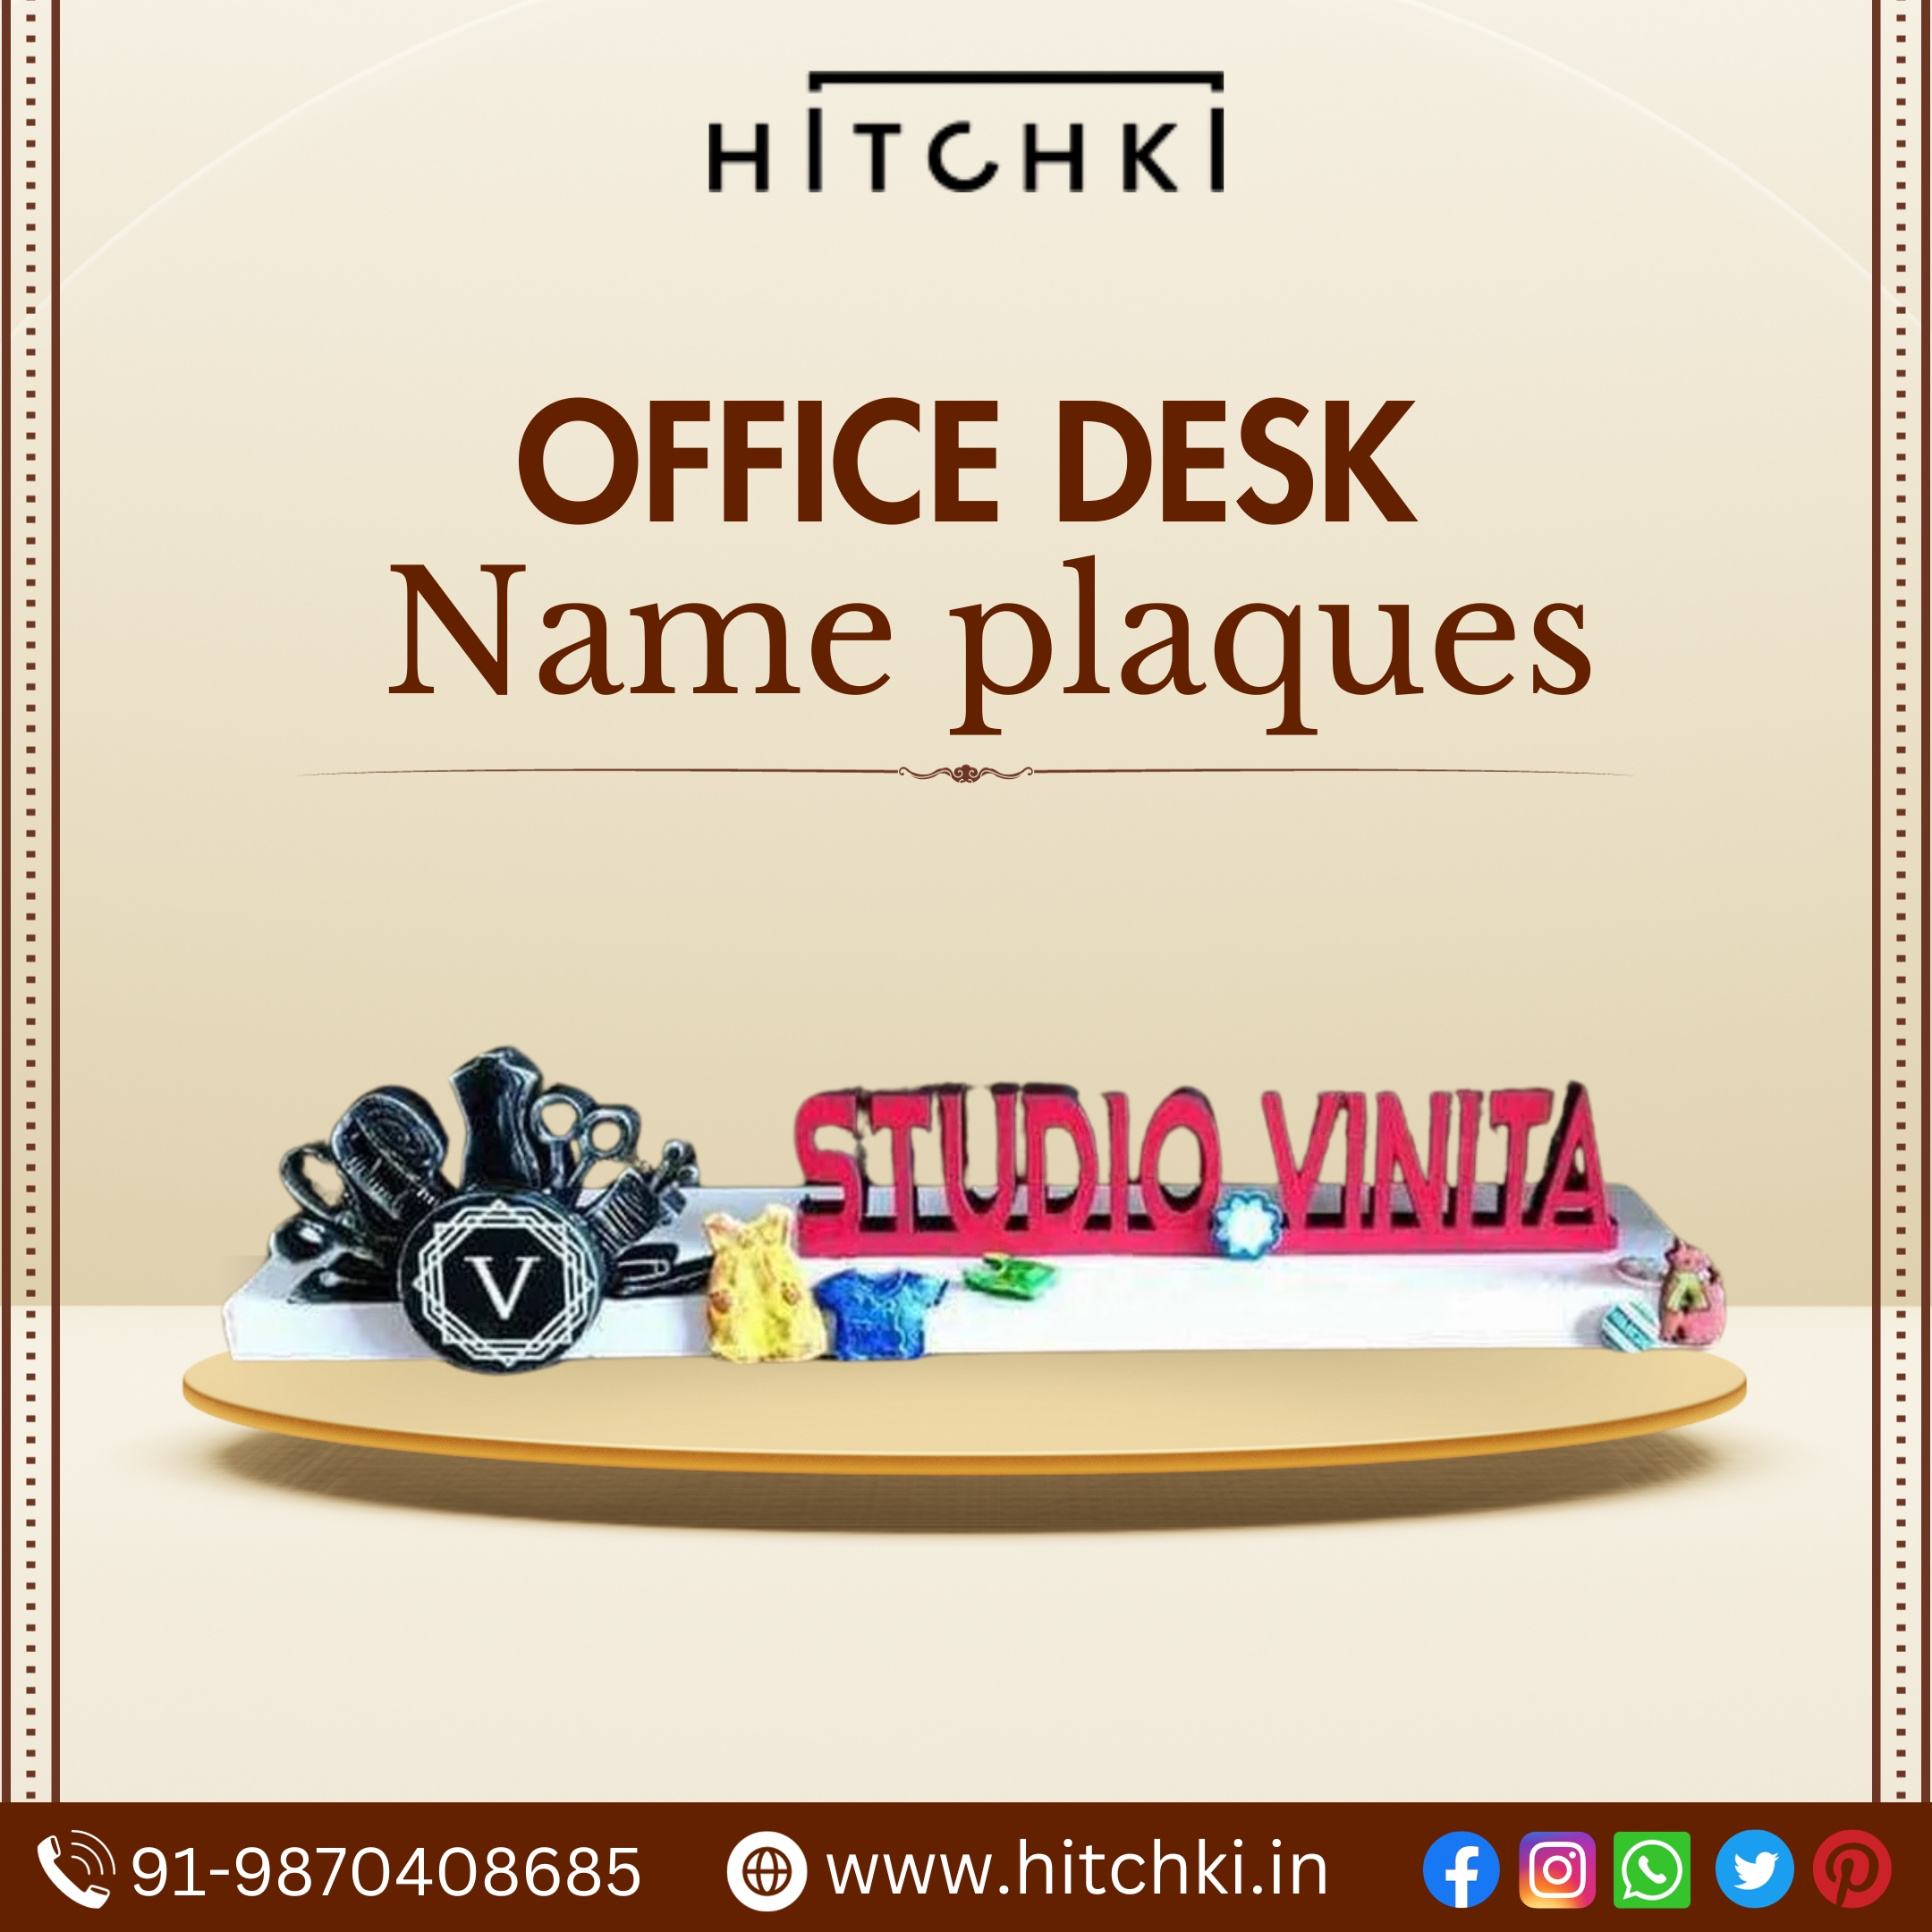 Personalize Your Workspace A Comprehensive Guide to Office Desk Name Plaques